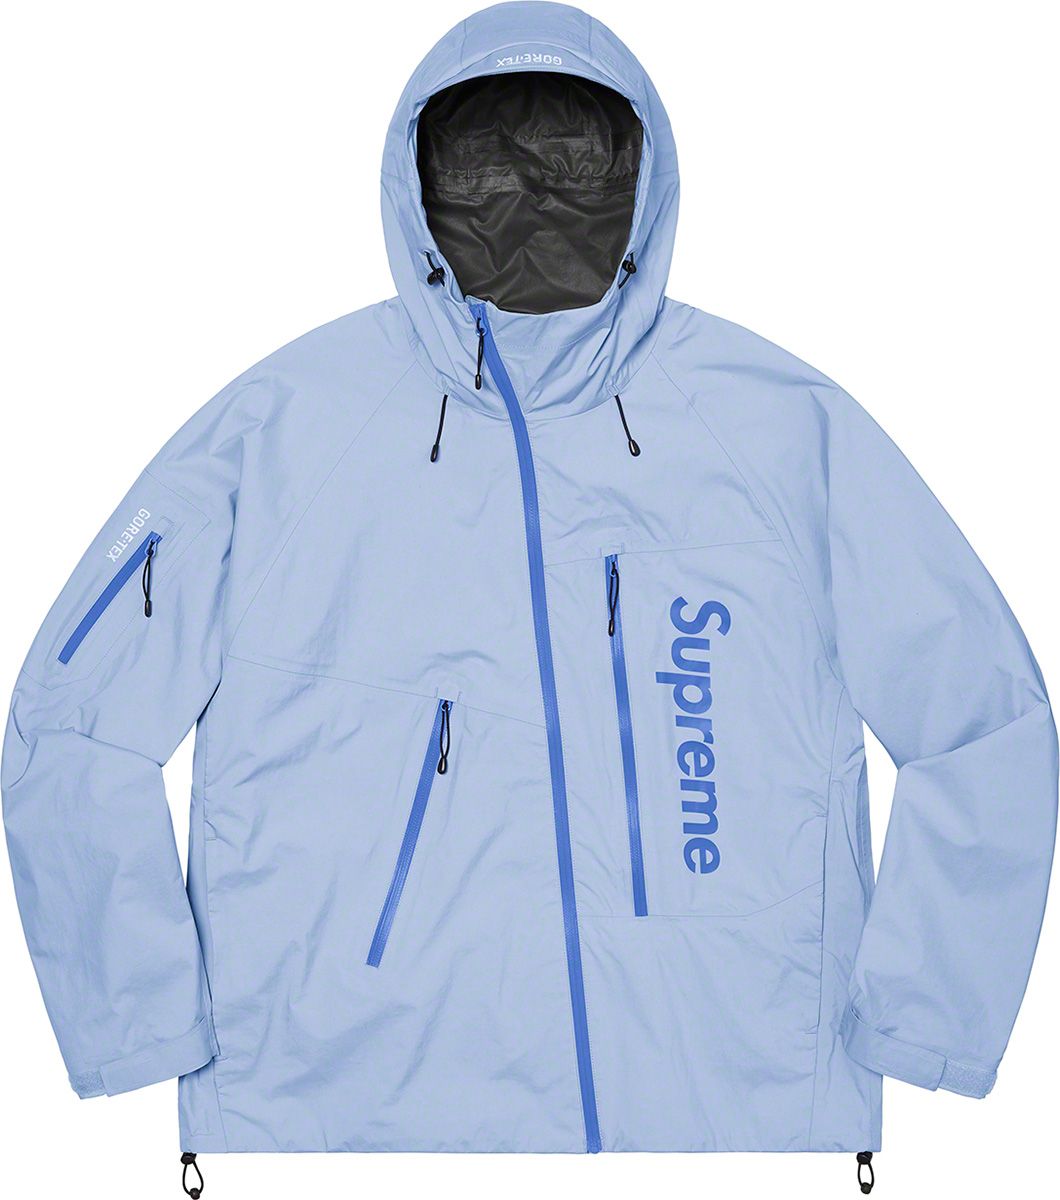 GORE-TEX Paclite Shell Jacket - Spring/Summer 2021 Preview – Supreme